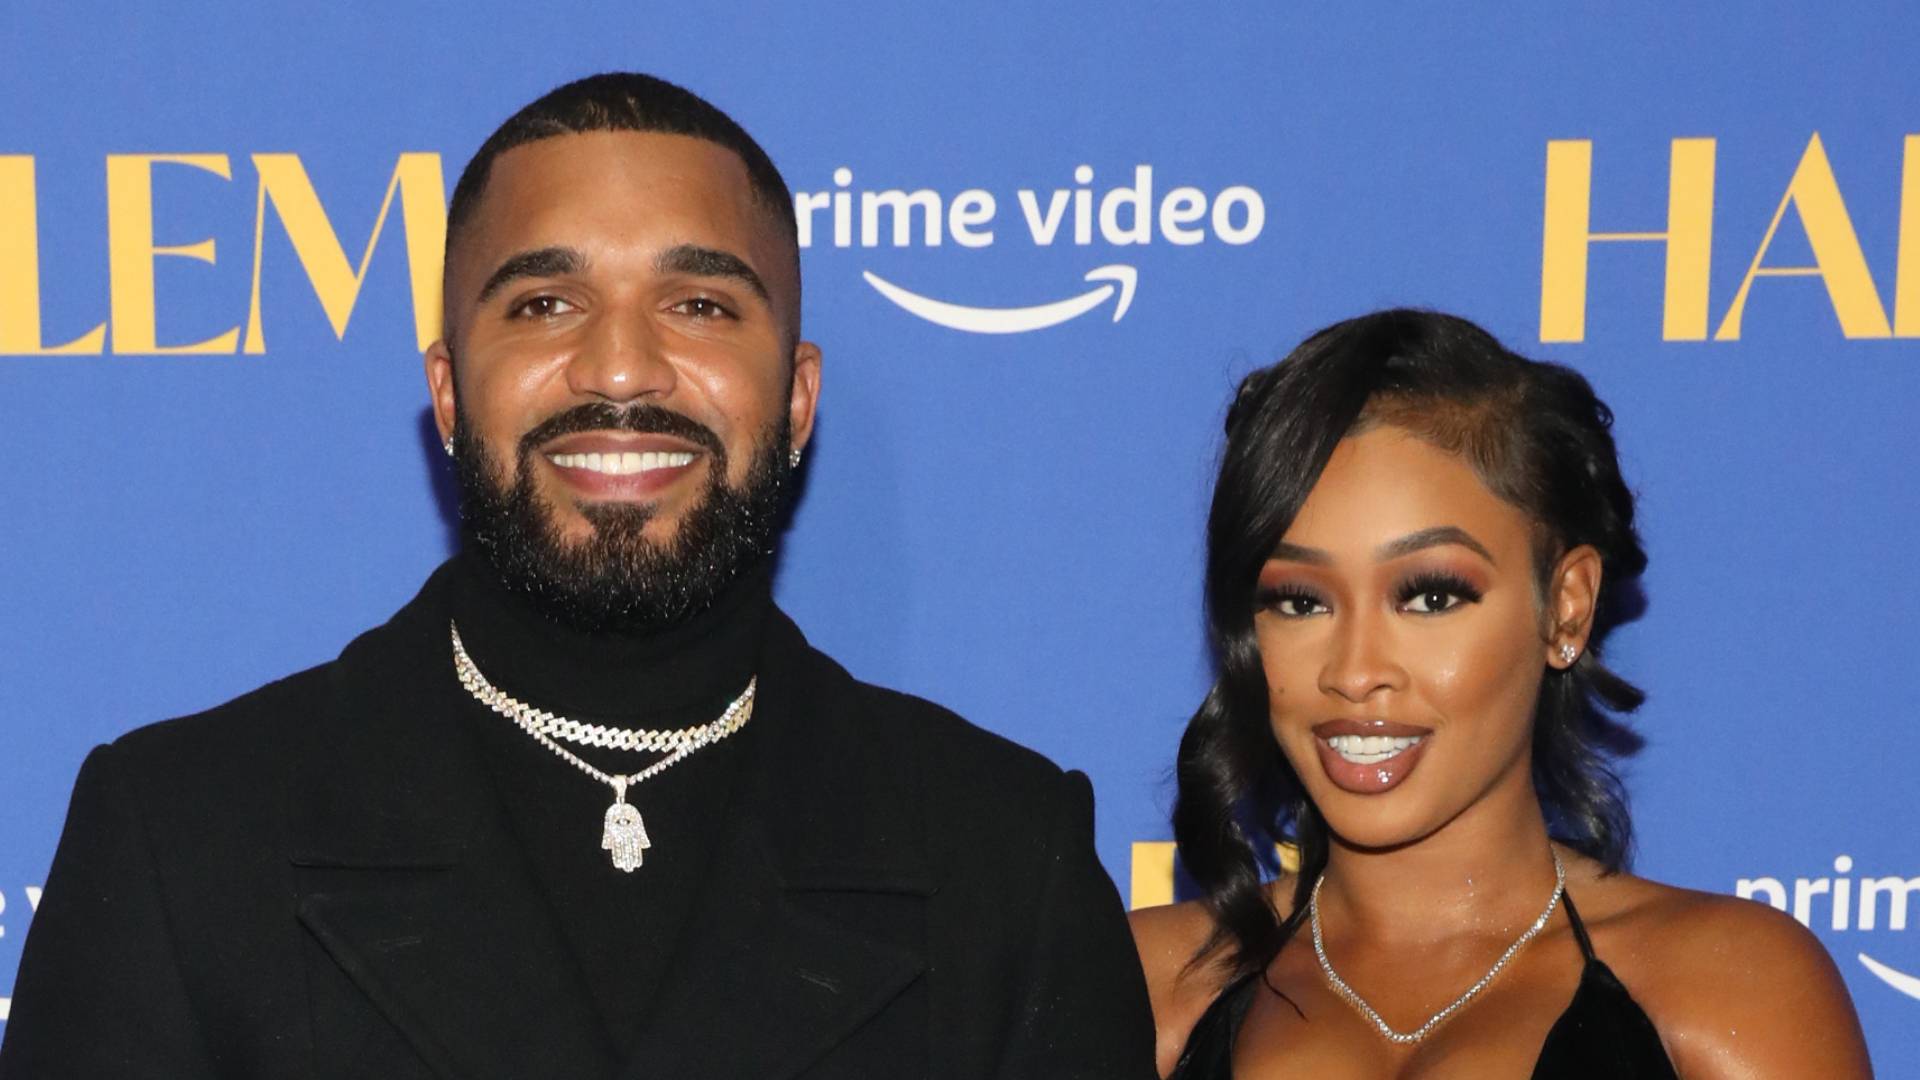 Tyler Lepley and Miracle Watts attend Prime Video's "Harlem" Premiere Screening and After Party at AMC Magic Johnson Theater on December 01, 2021 in New York City.